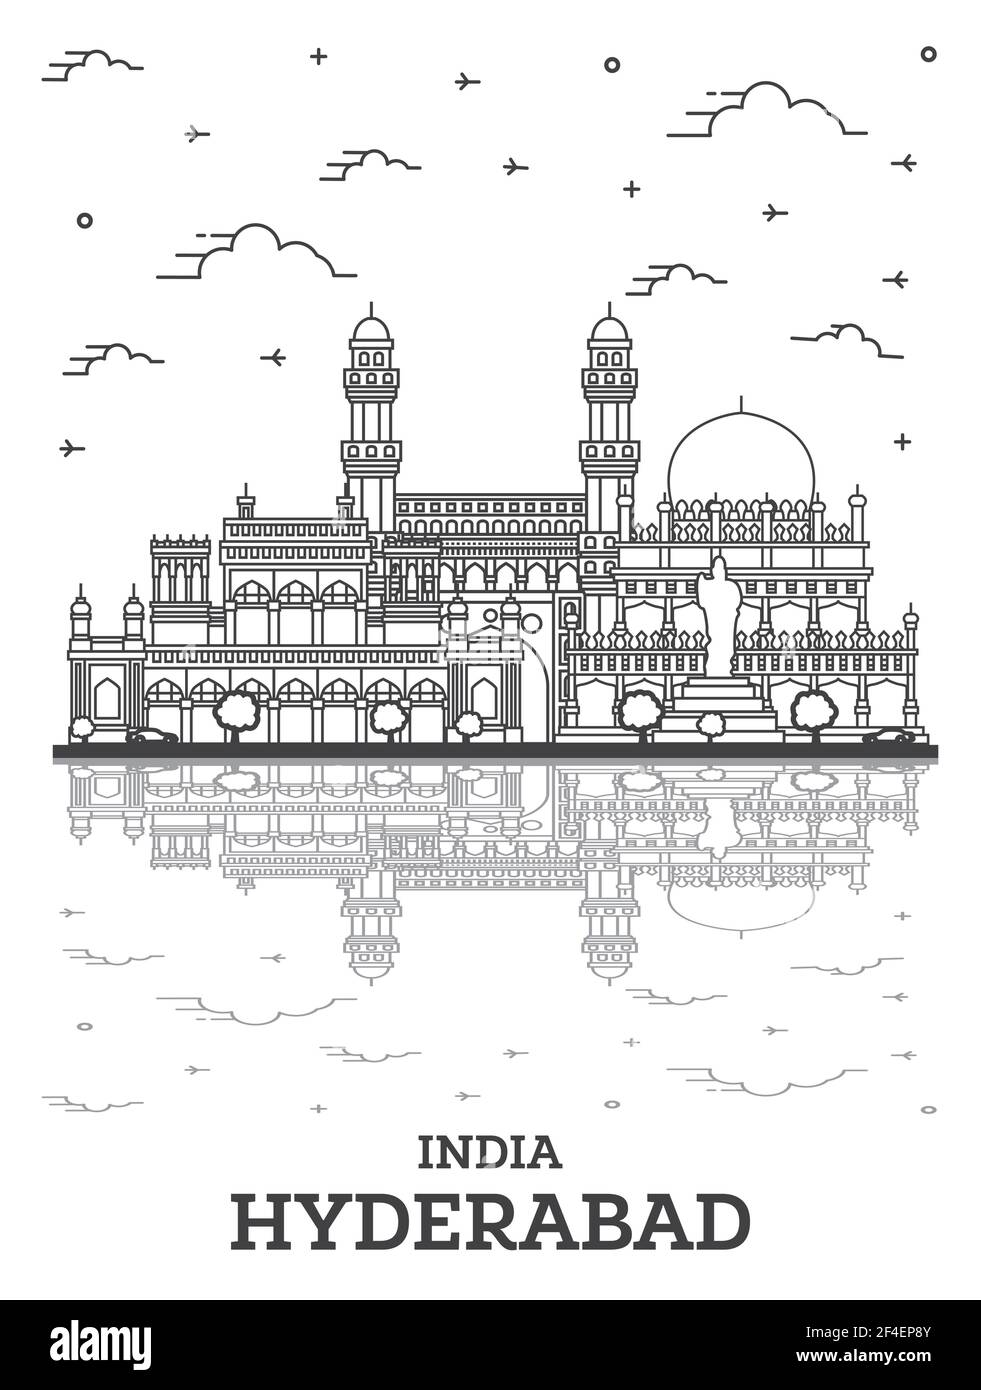 Outline Hyderabad India City Skyline with Historical Buildings and Reflections Isolated on White. Vector Illustration. Hyderabad Cityscape. Stock Vector